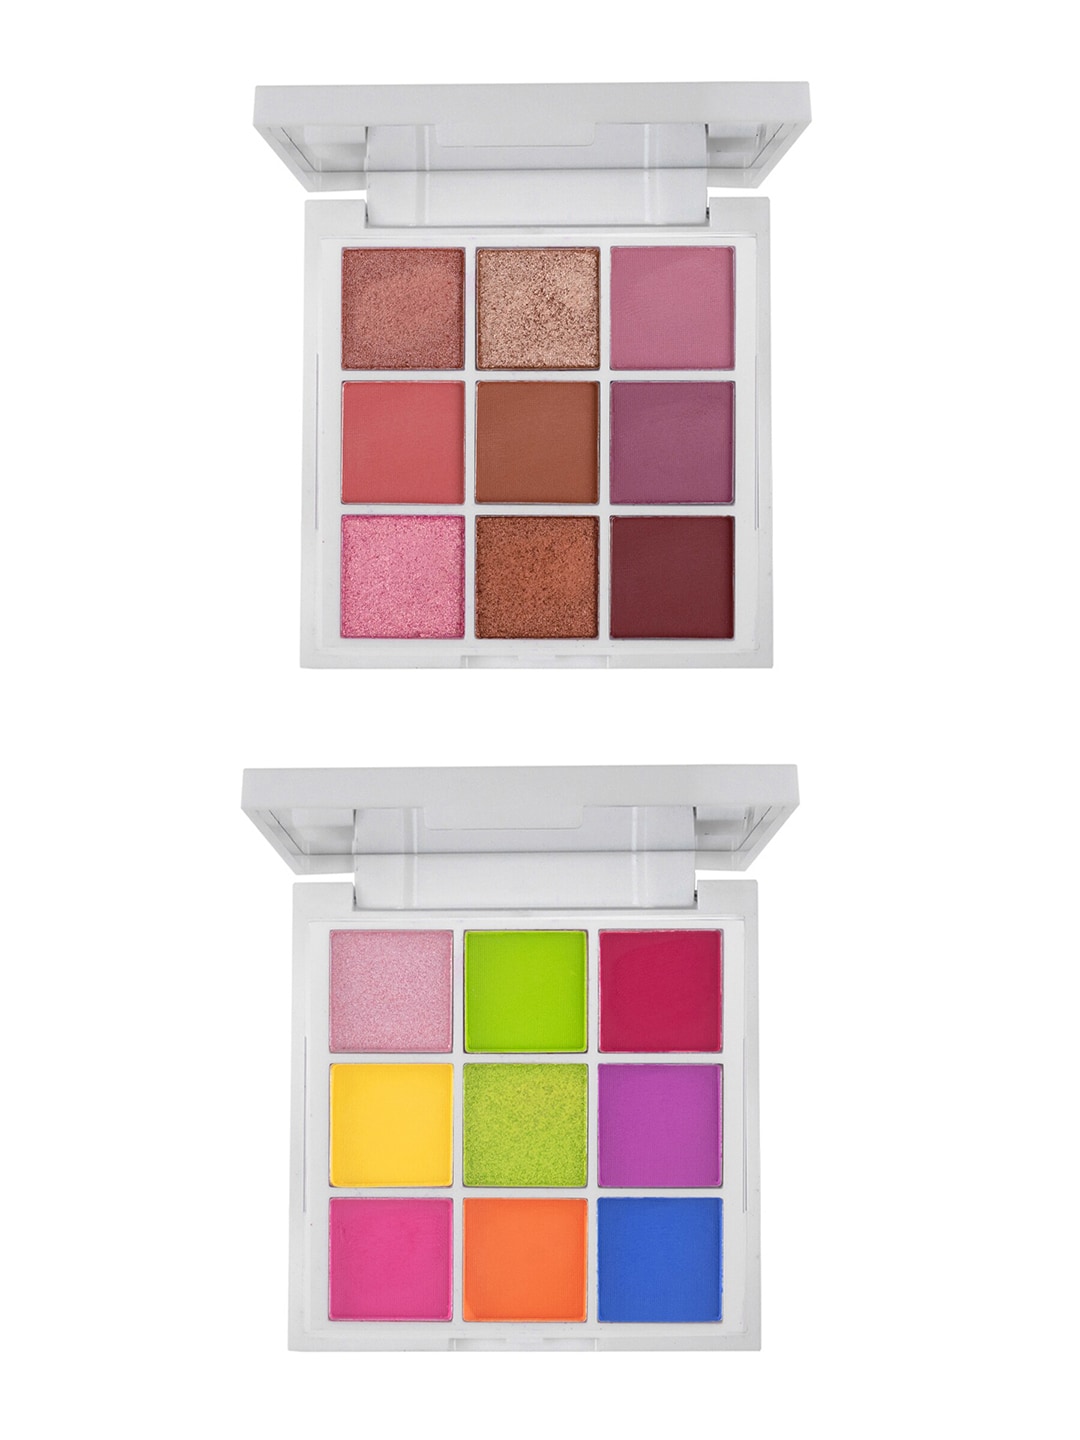 MARS Set of 2 I Belong in Your Purse Eyeshadow Palettes - Soft Glam & Bold & Beautiful Price in India